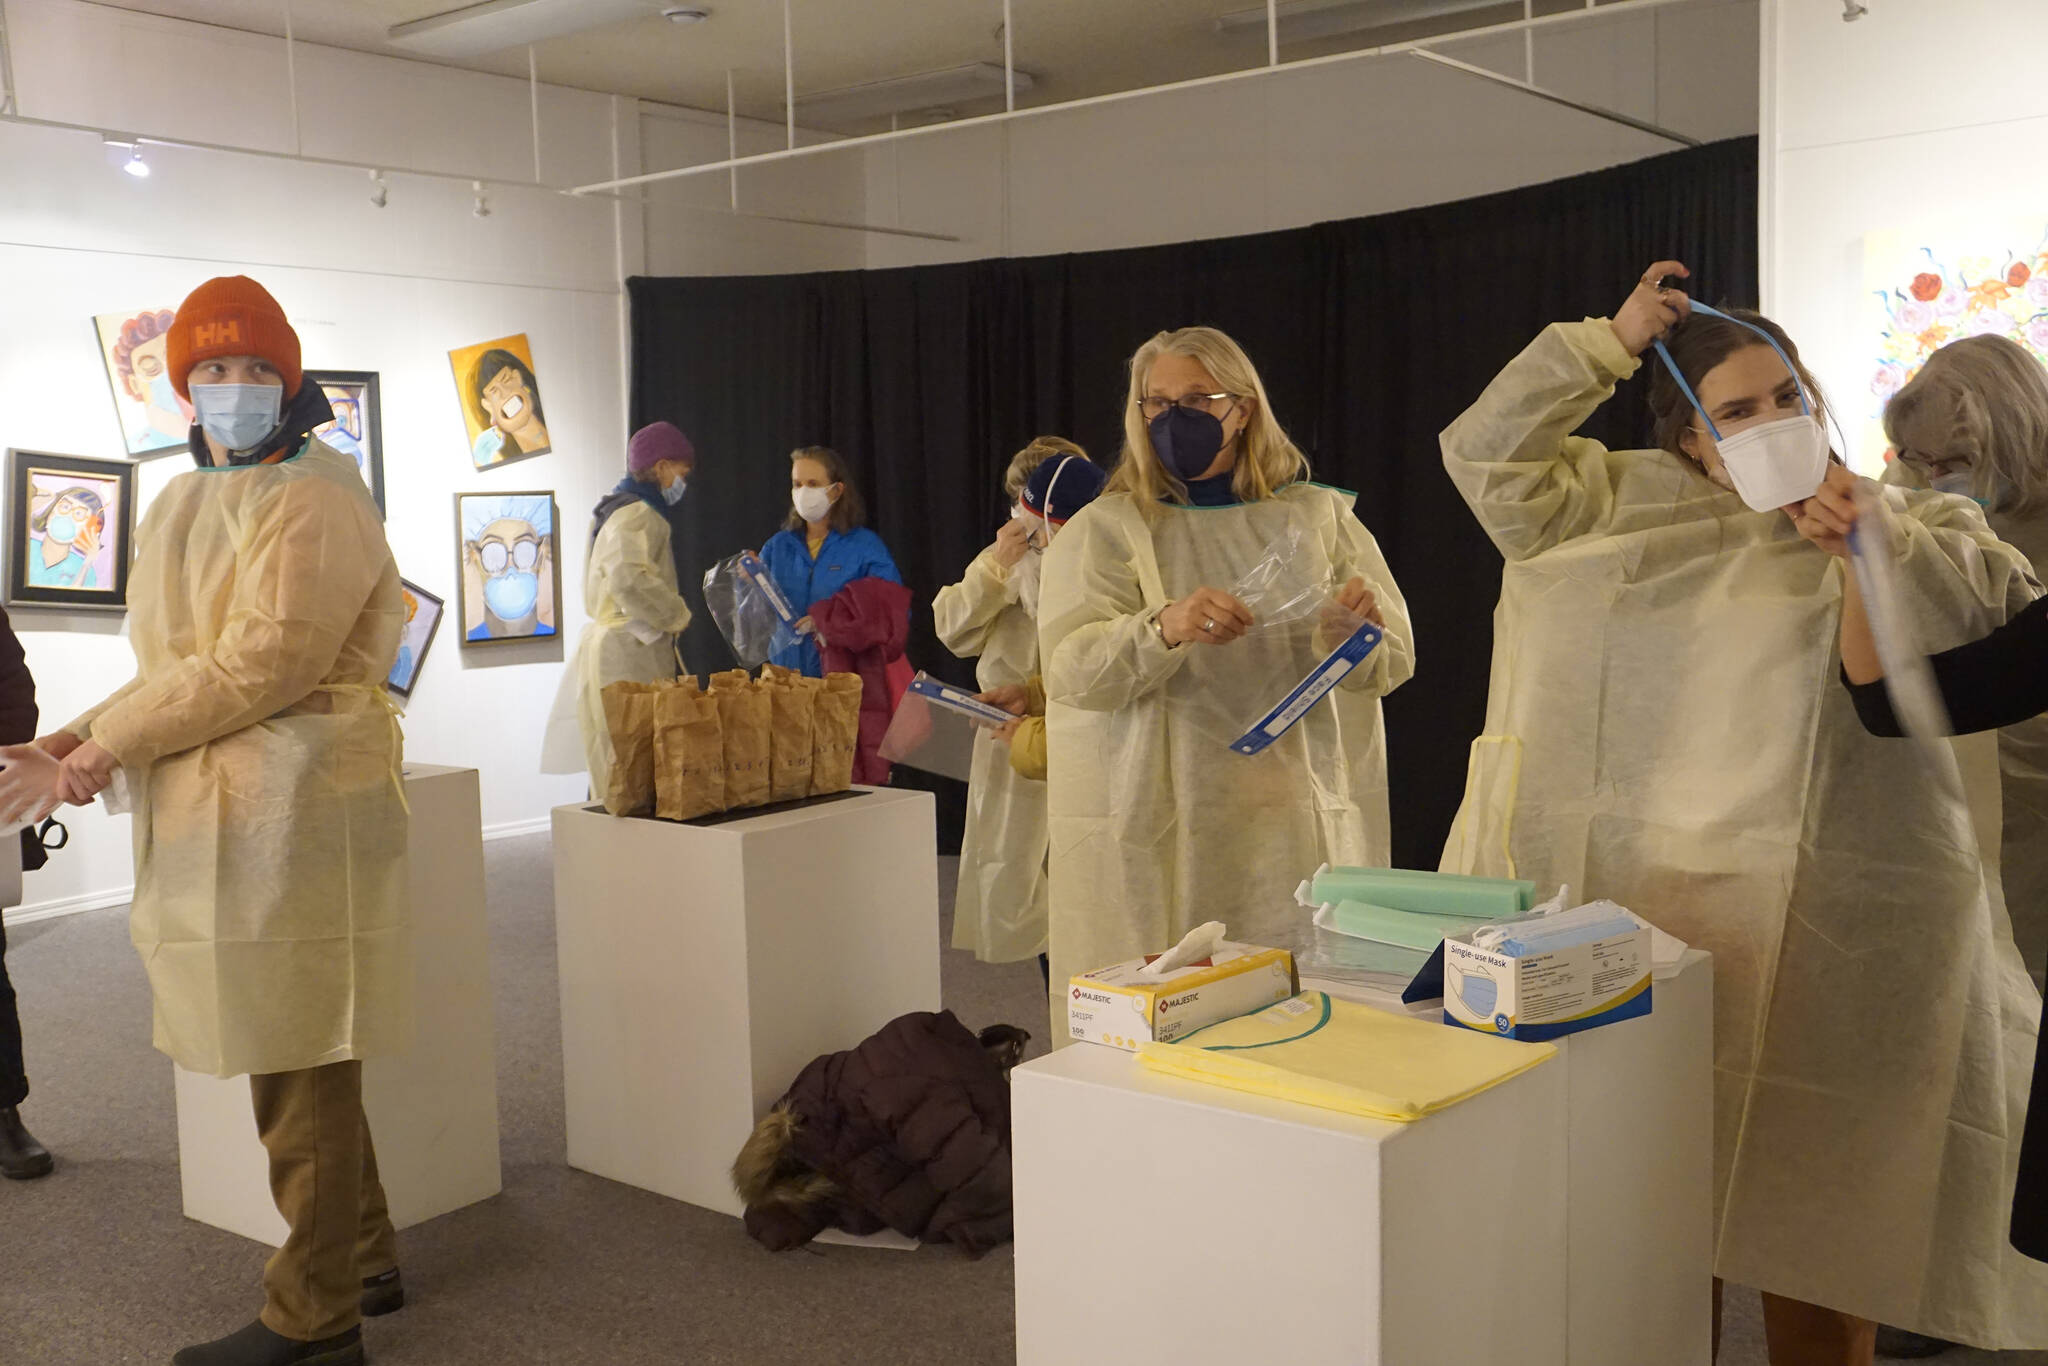 Visitors put on personal protective equipment before an artist talk by Dr. Sami Ali' at the Jan. 7, 2022, First Friday opening of her exhibit, "The Mind of a Healthcare Worker During the COVID-19 Pandemic," at the Homer Council on the Arts in Homer, Alaska. (Photo by Michael Armstrong/Homer News)